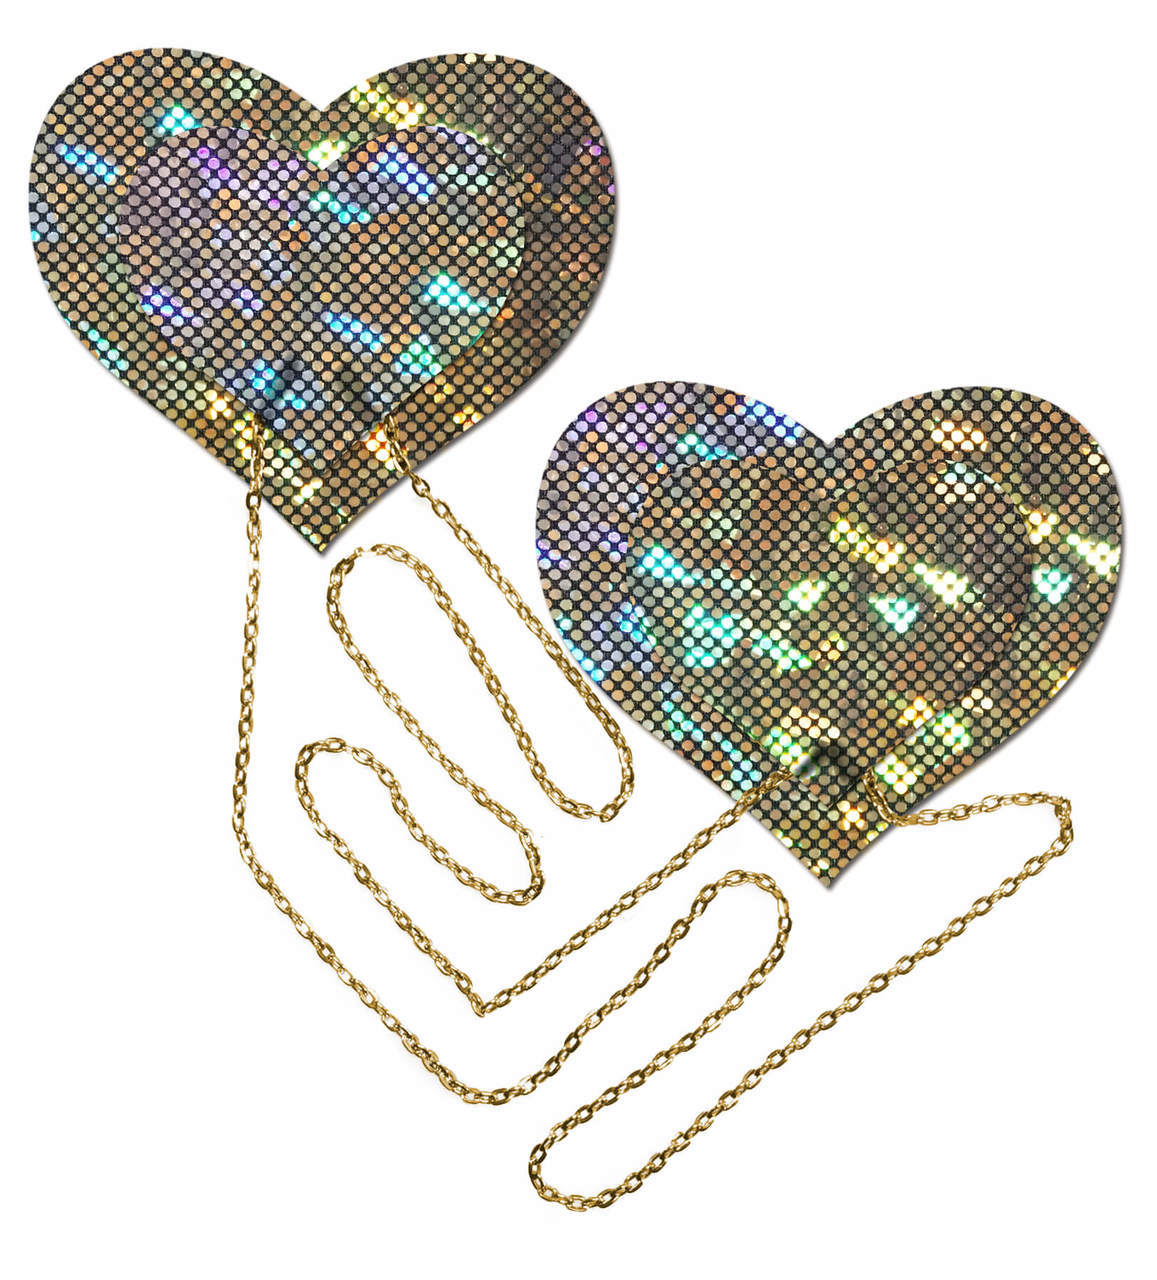 GOLD SHATTERED DISCO BALL HEART W/ GOLD CHAINS PASTIES